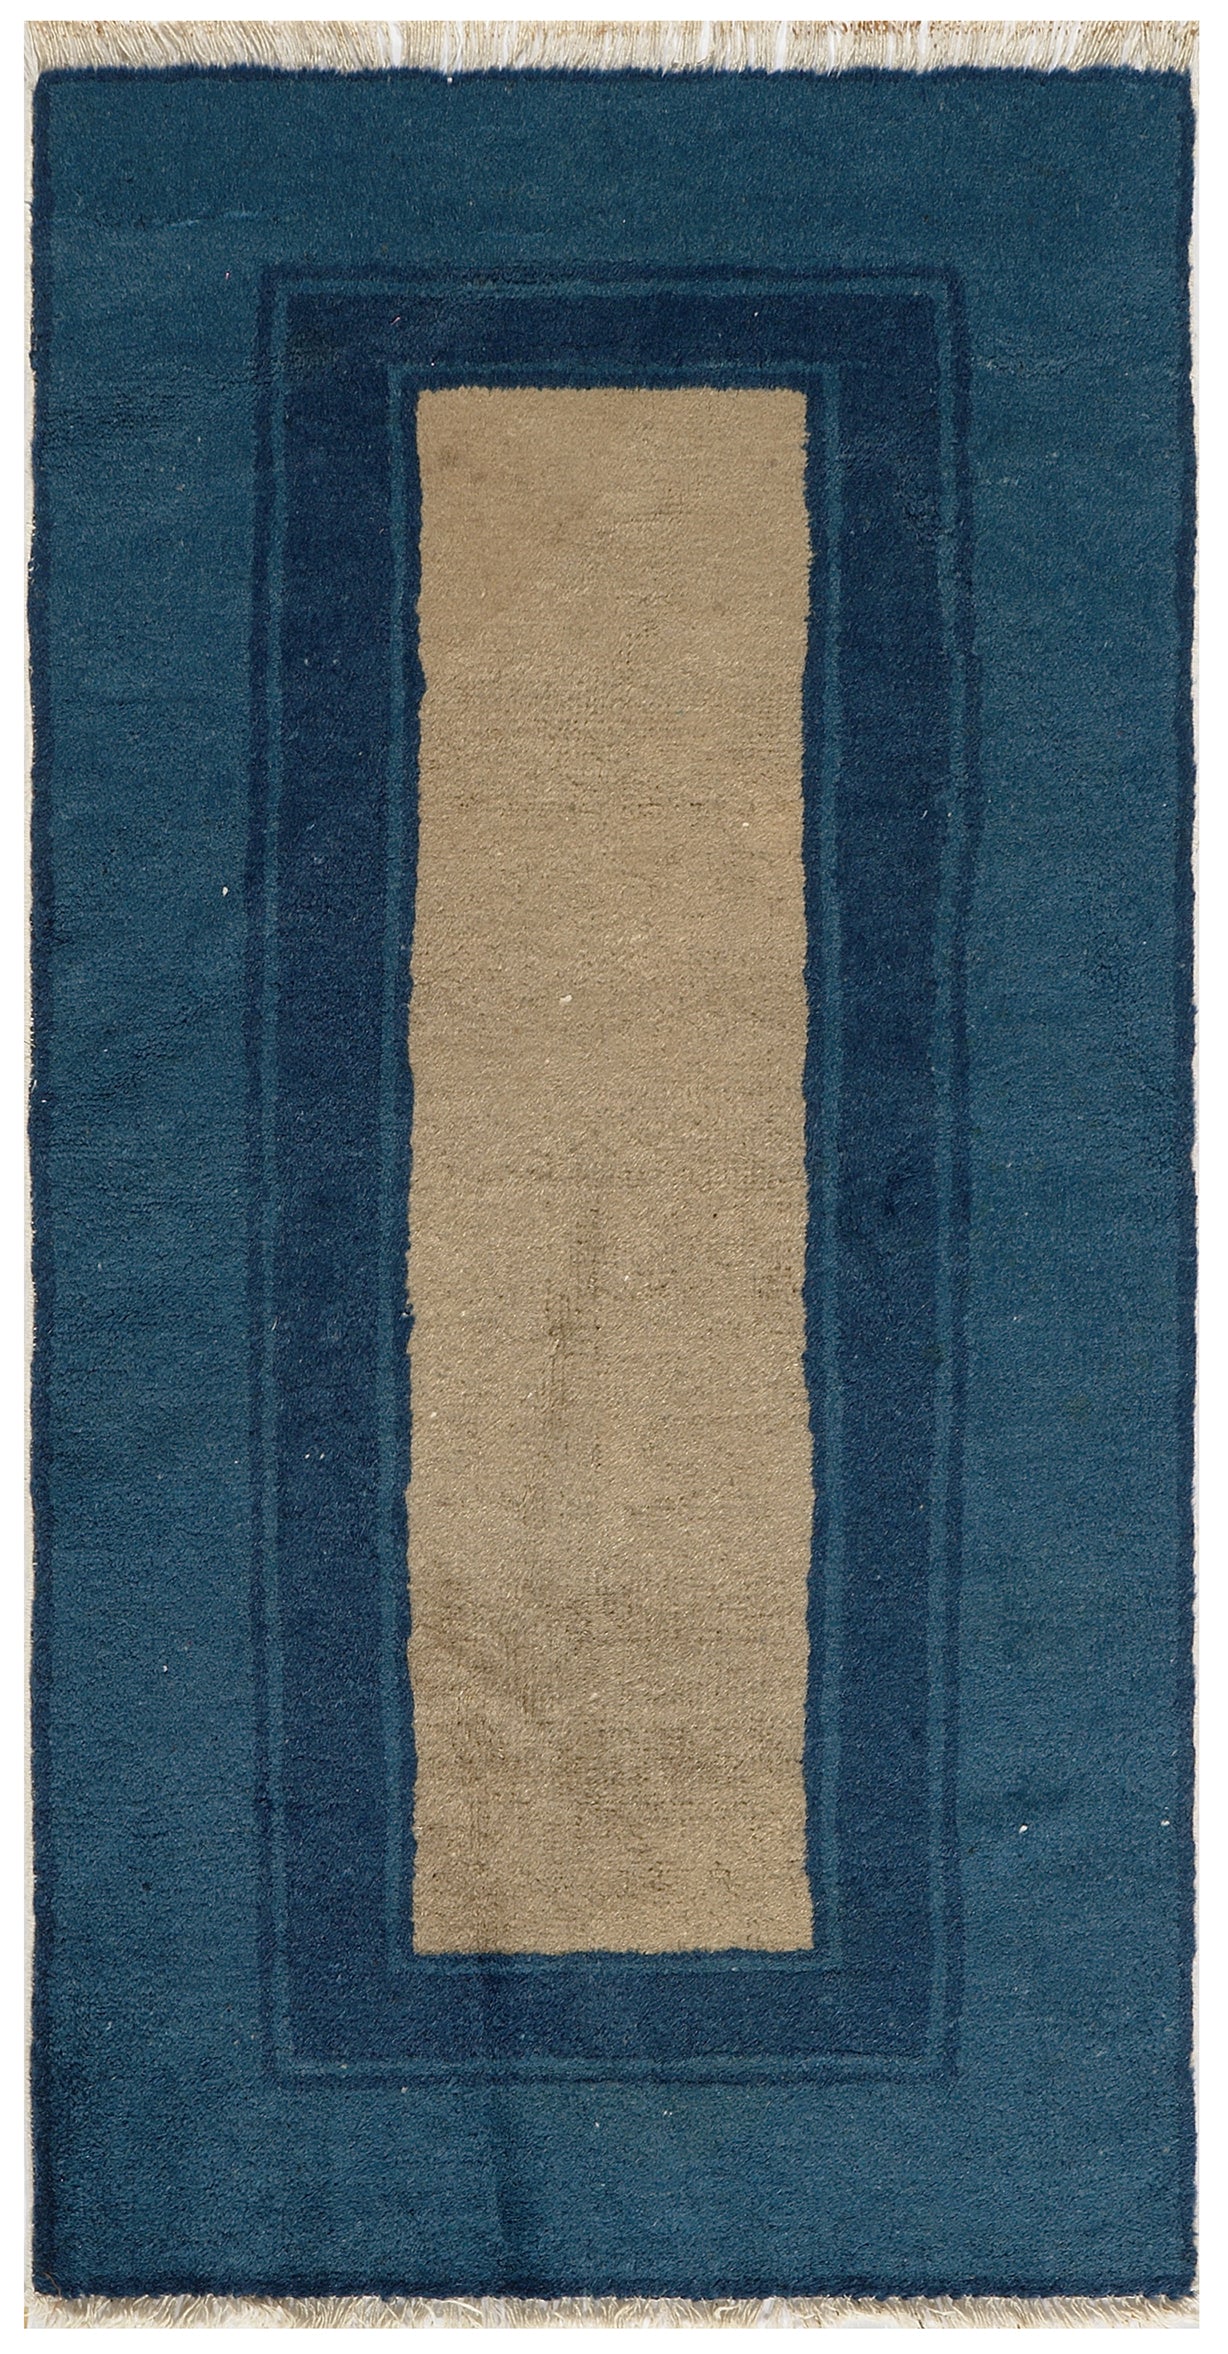 2'x4' Blue and Tan Chinese Art Deco Rug